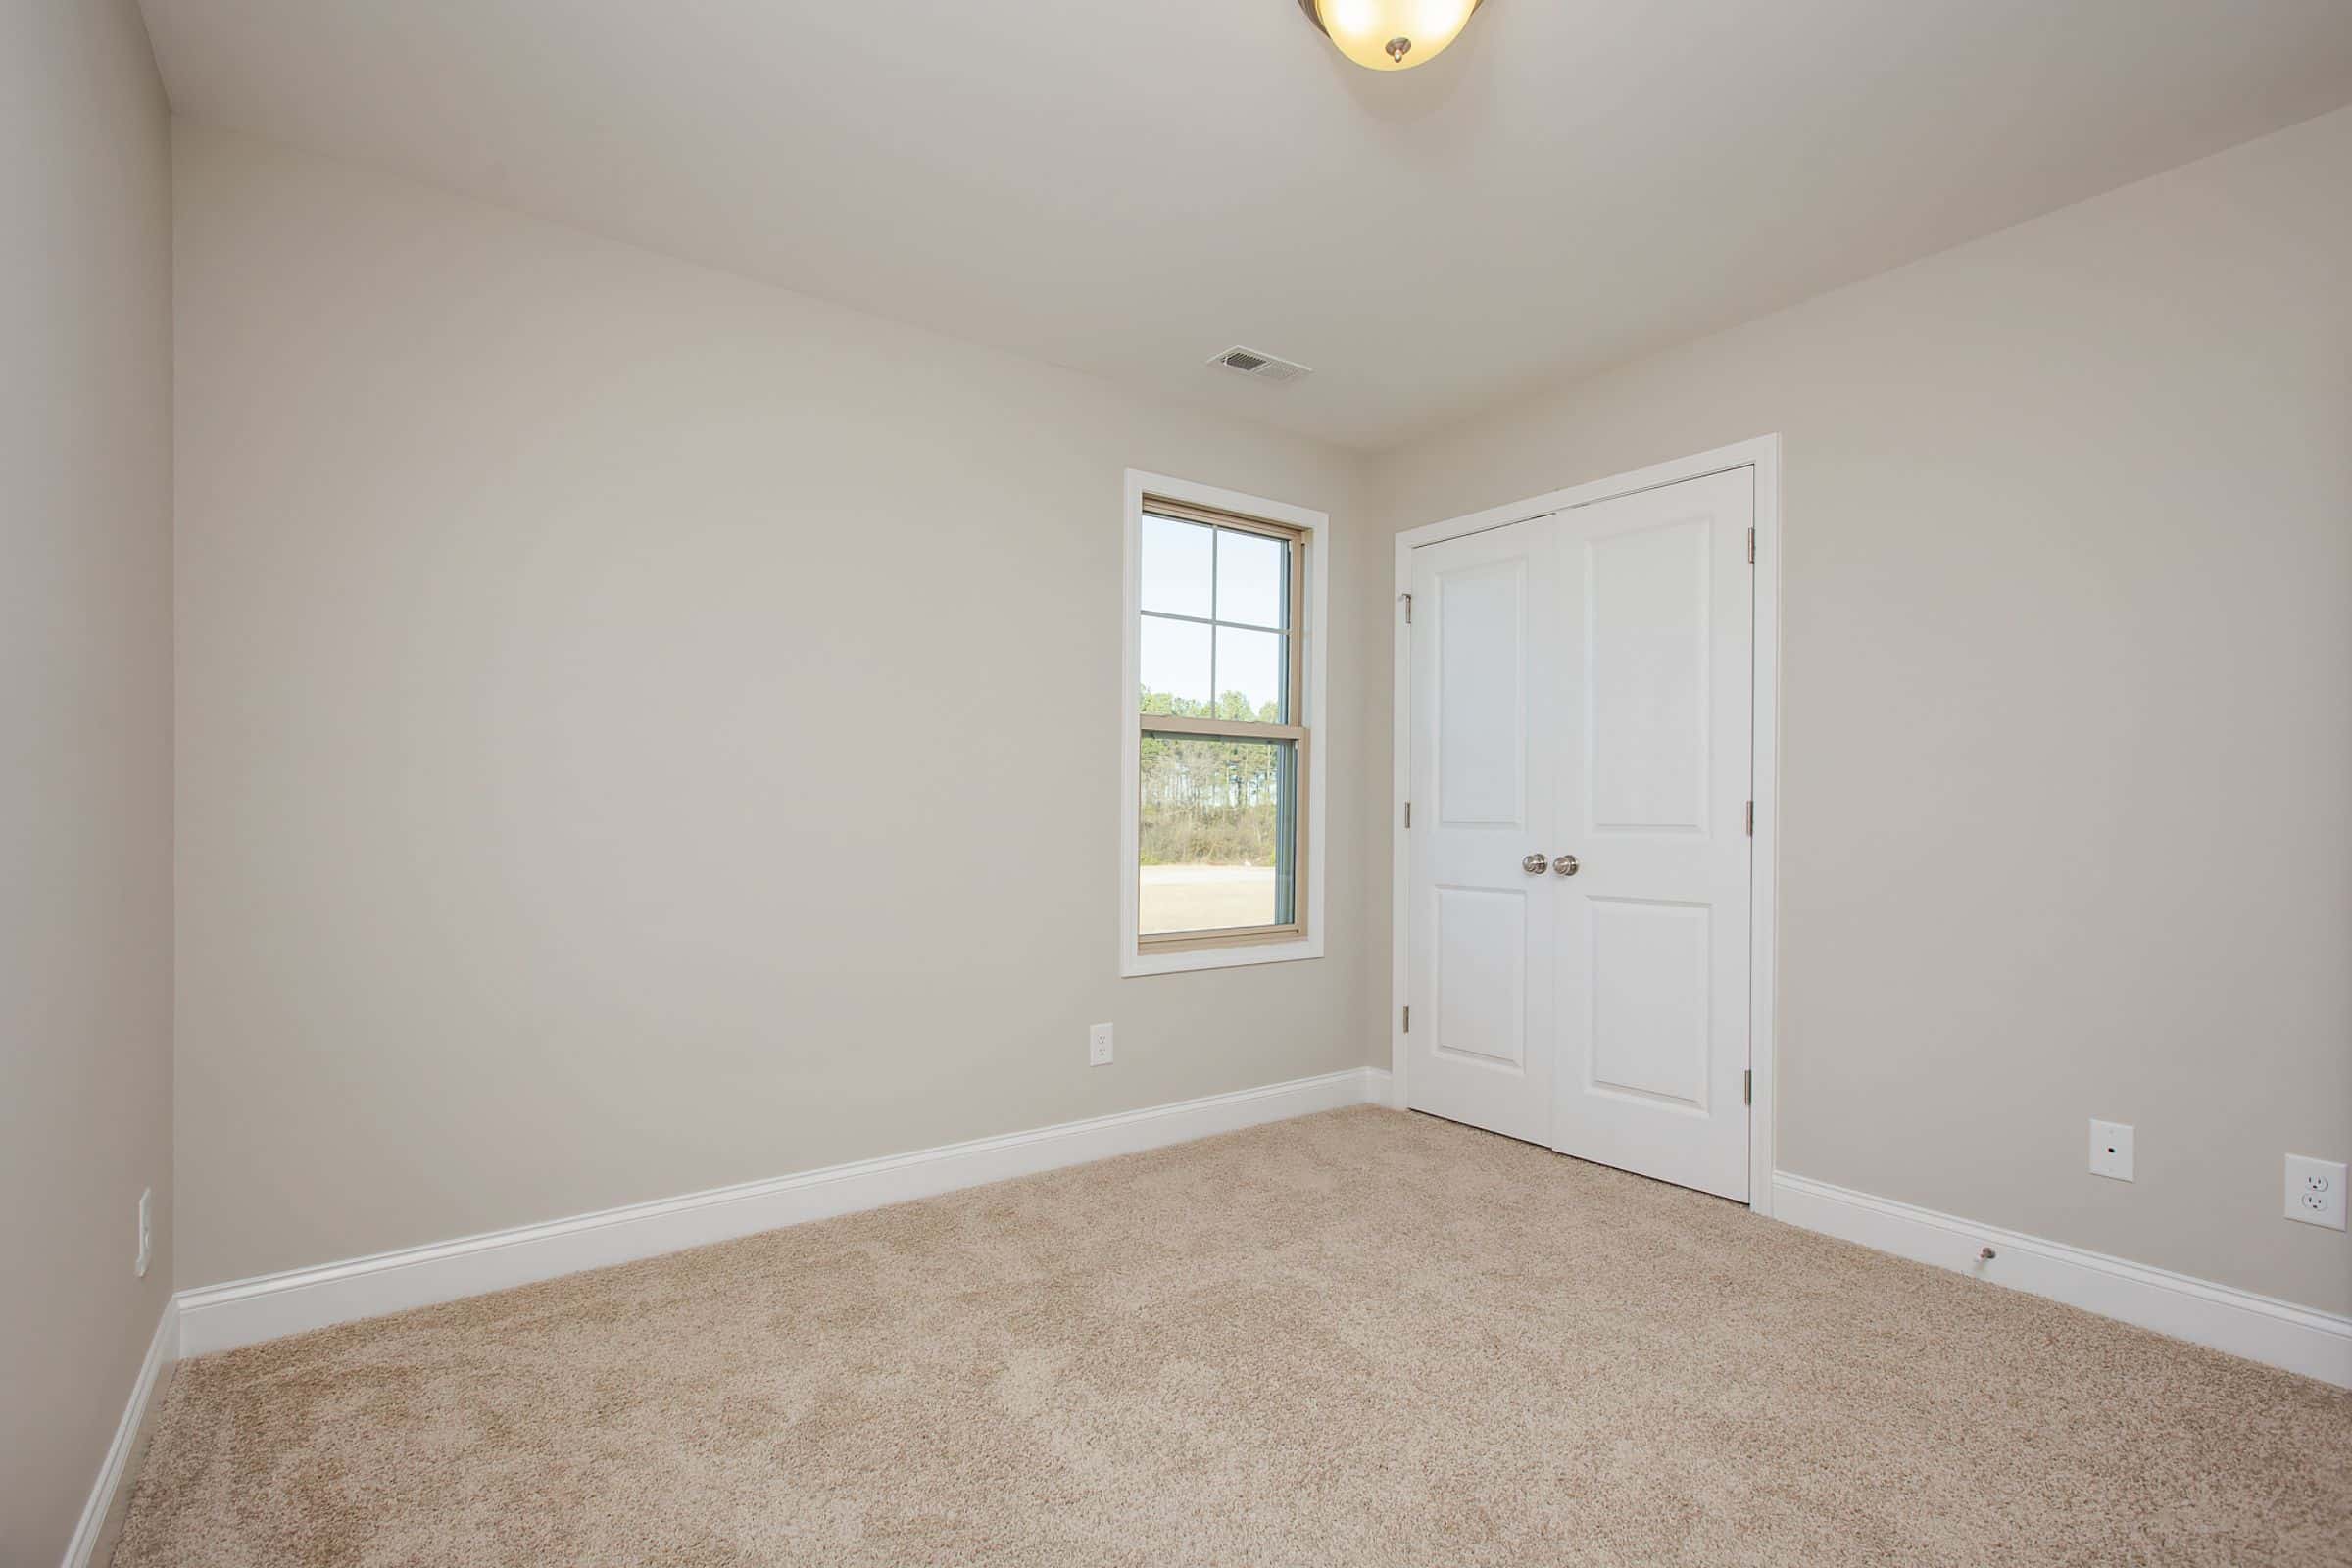 Empty Bedroom with closet and carpet